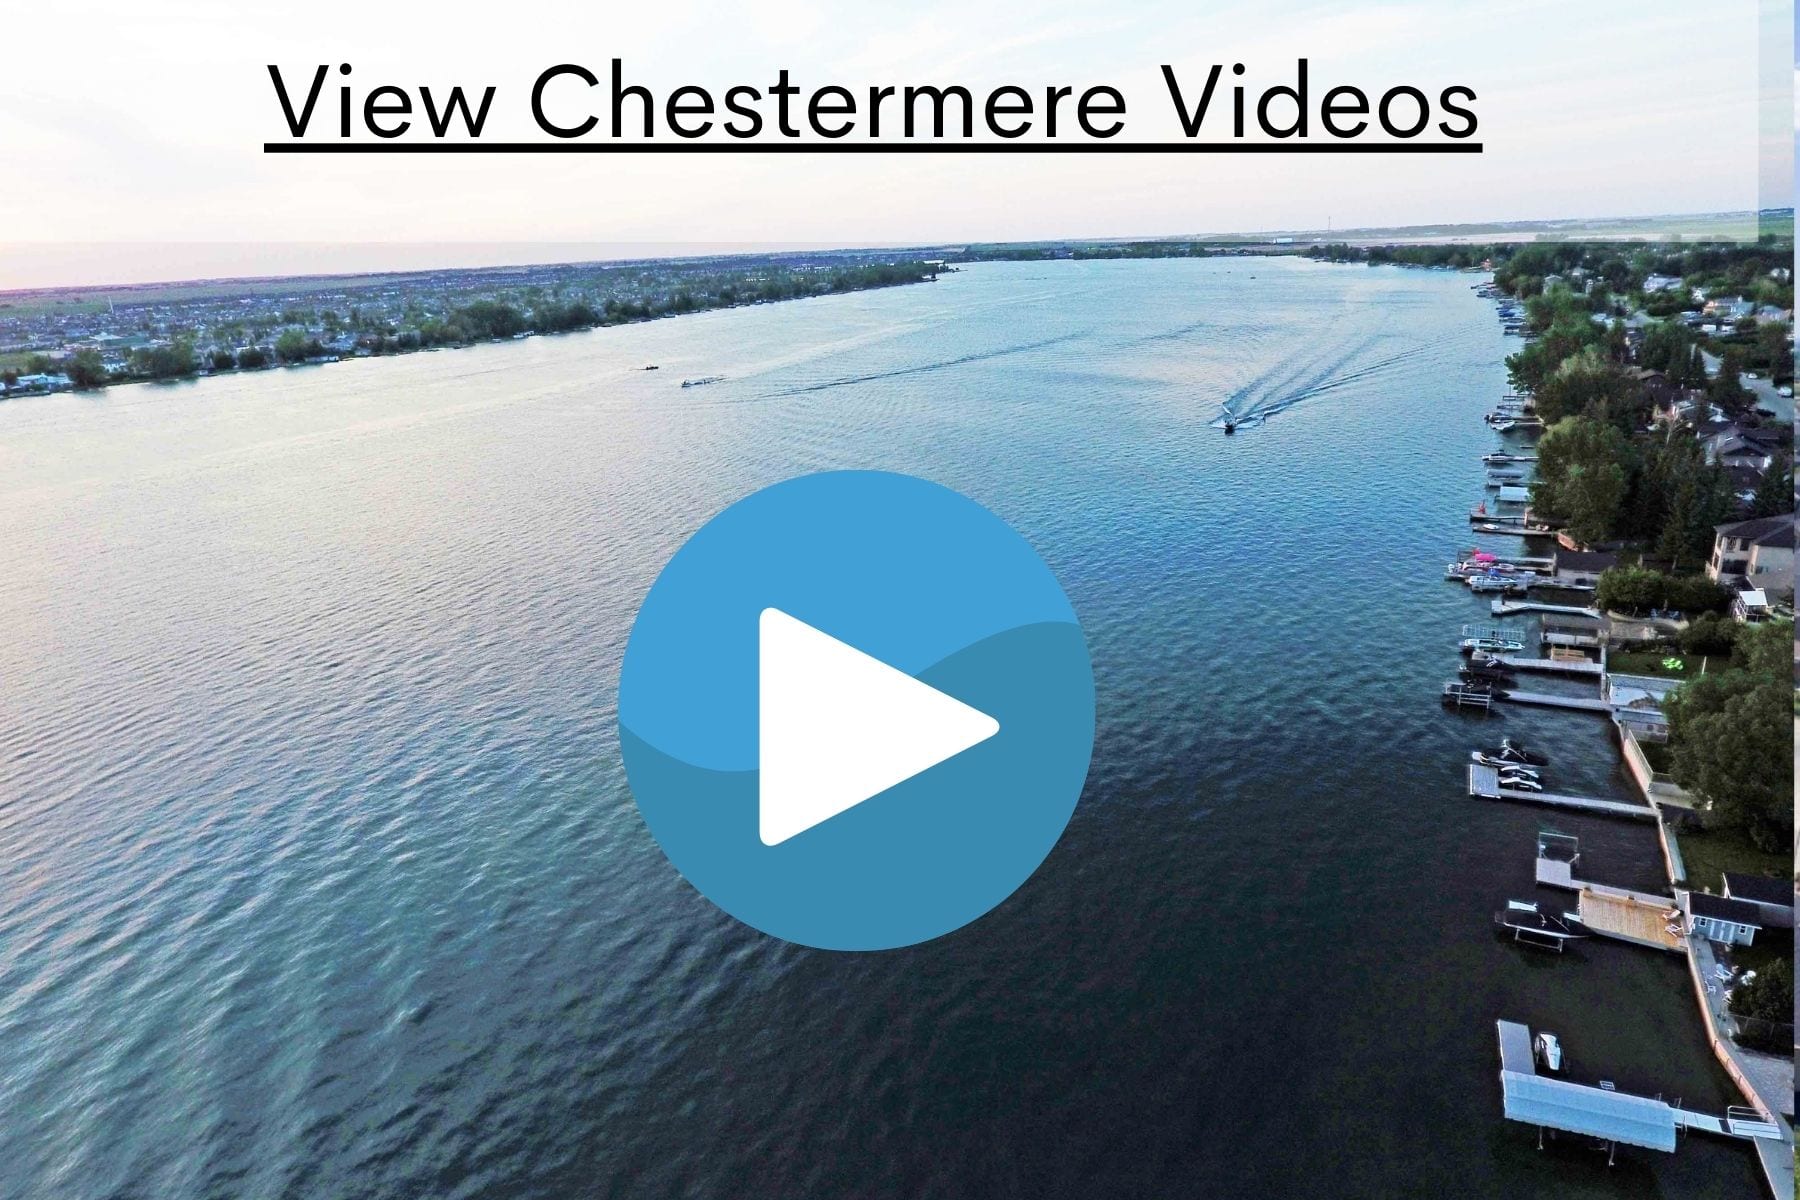 Videos of Chestermere